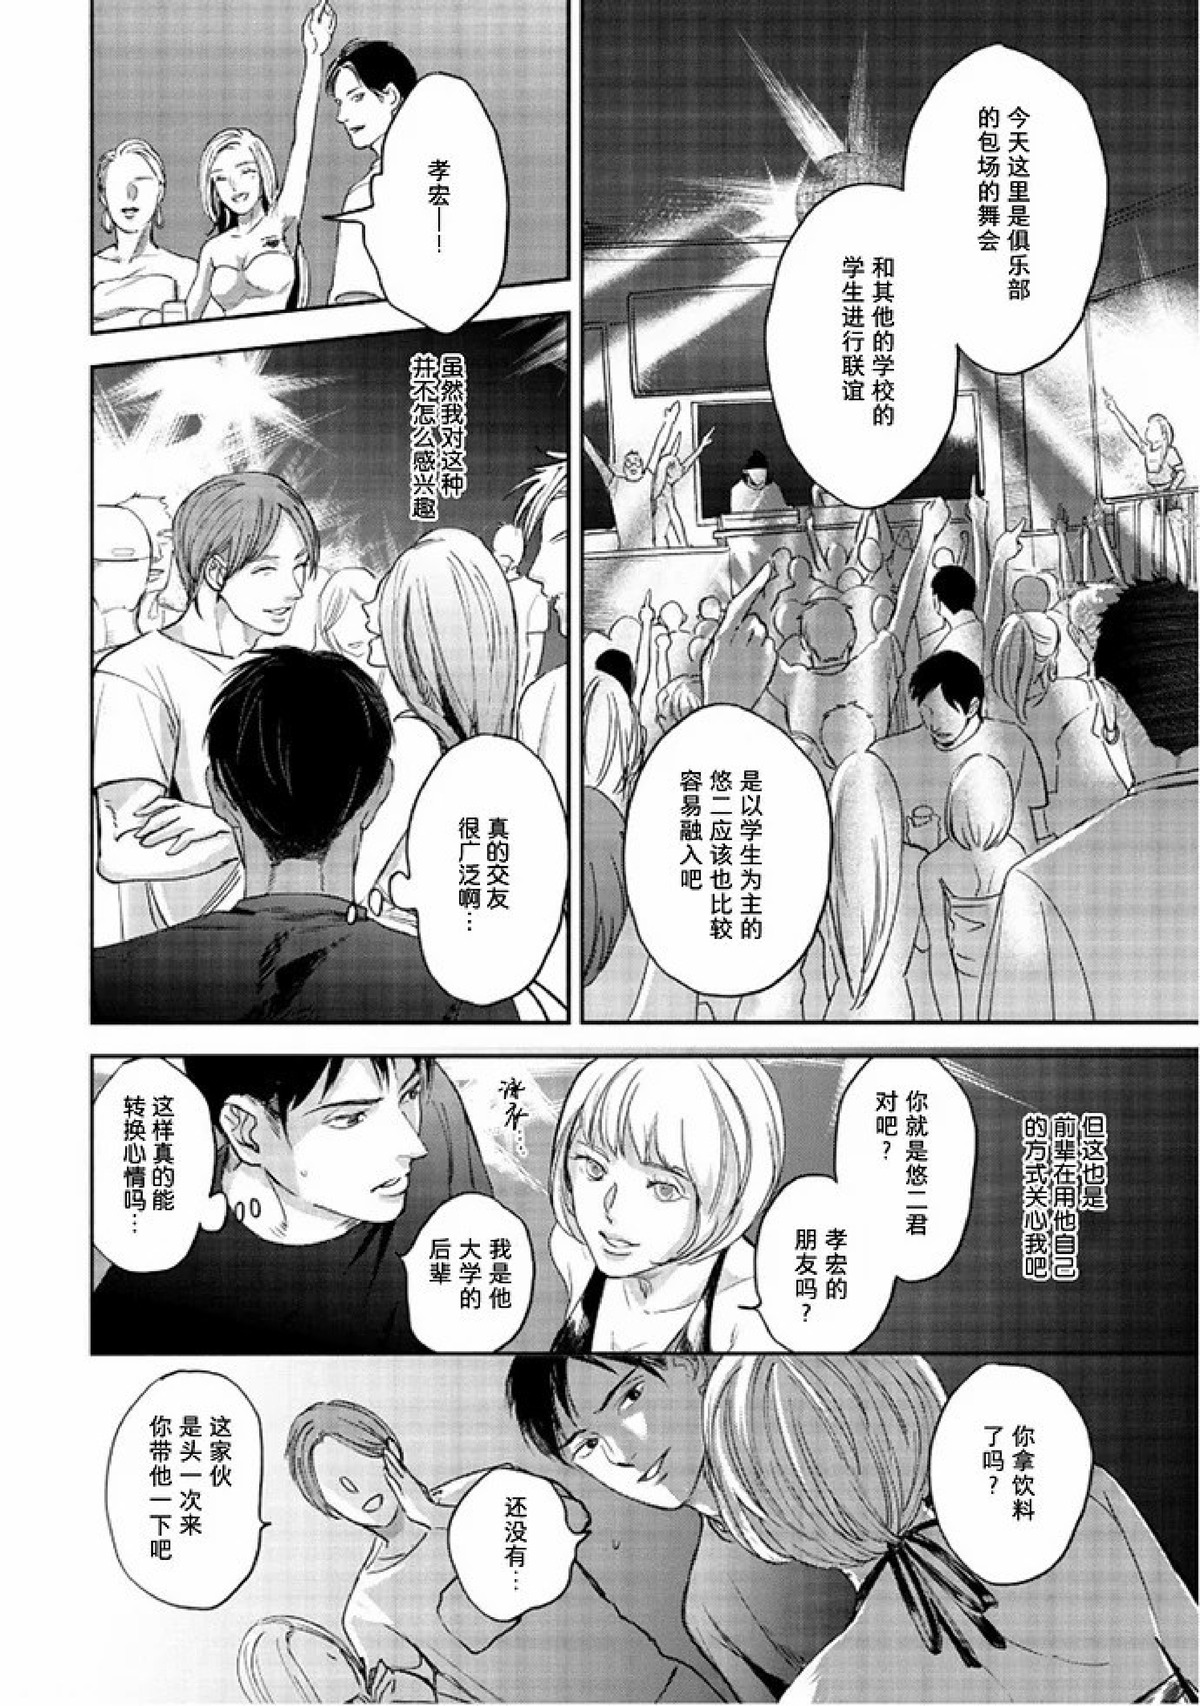 【Two sides of the same coin[腐漫]】漫画-（上卷01-02）章节漫画下拉式图片-42.jpg